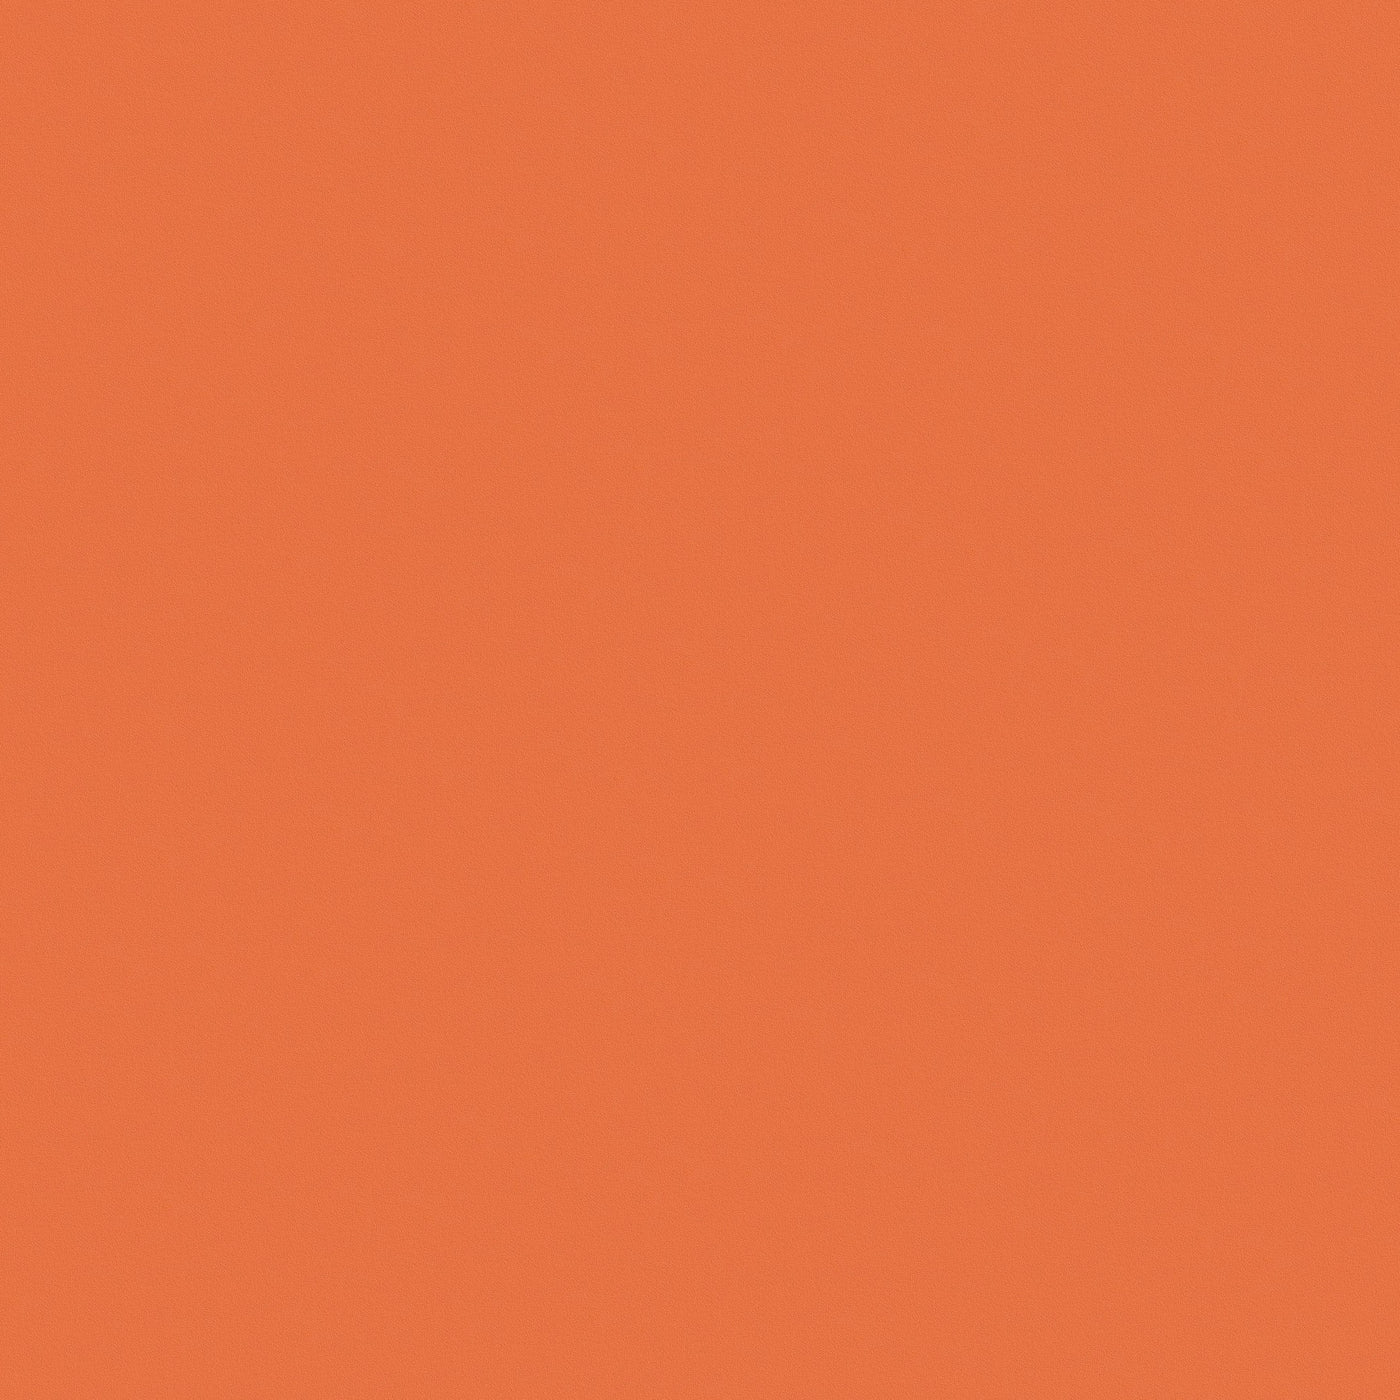 FLAME - orange 12x12 smooth cardstock that cuts great - Lessebo Paper